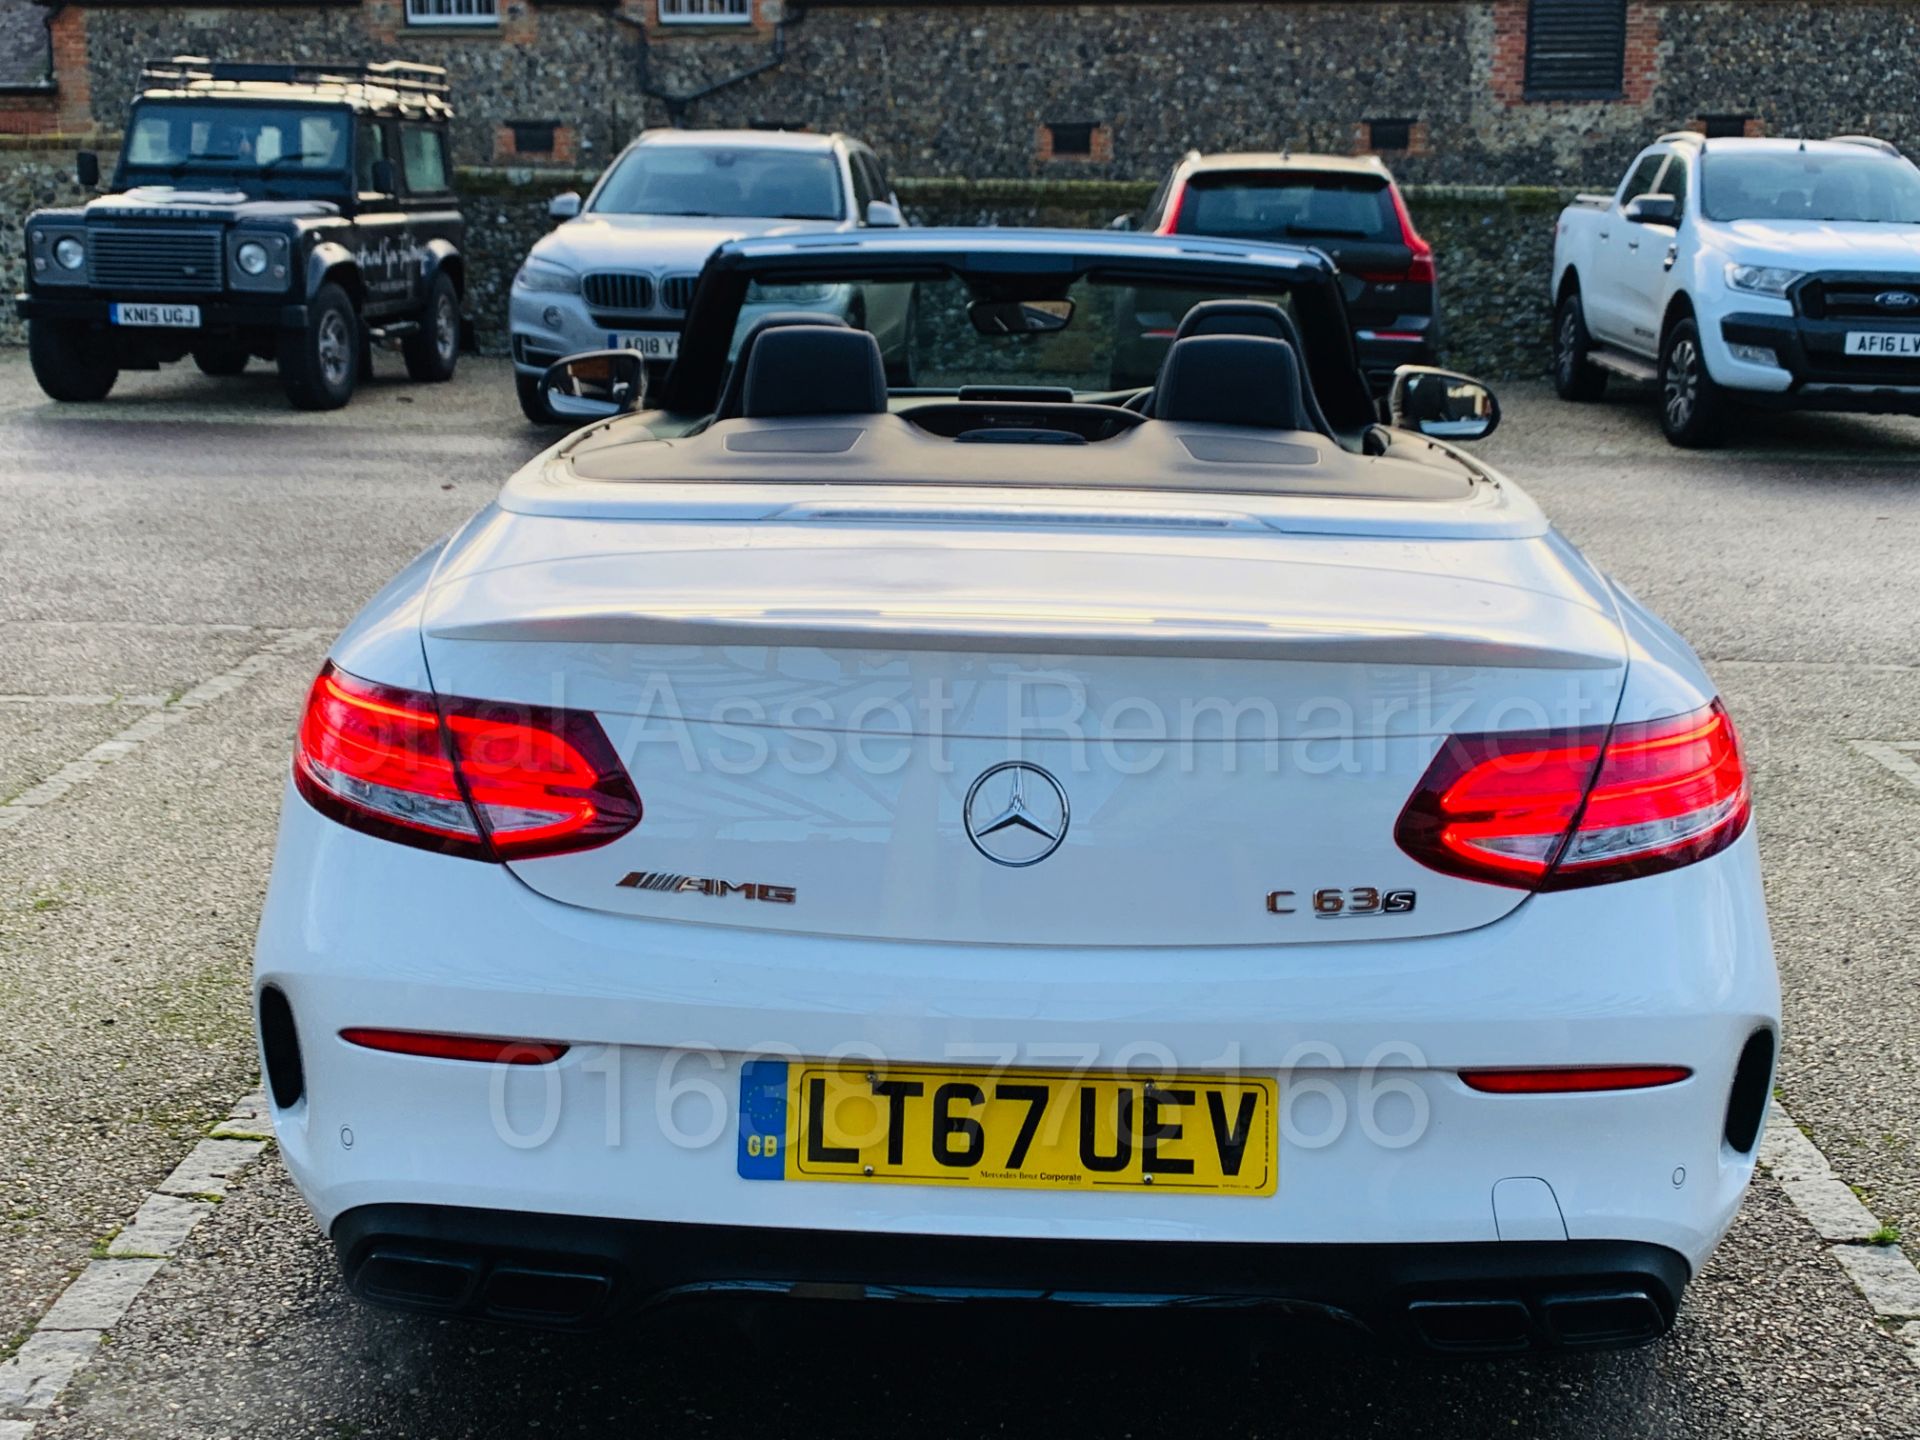 (On Sale) MERCEDES-BENZ AMG C63-S *CABRIOLET* (67 REG) '4.0 BI-TURBO -510 BHP - AUTO' *FULLY LOADED* - Image 19 of 79